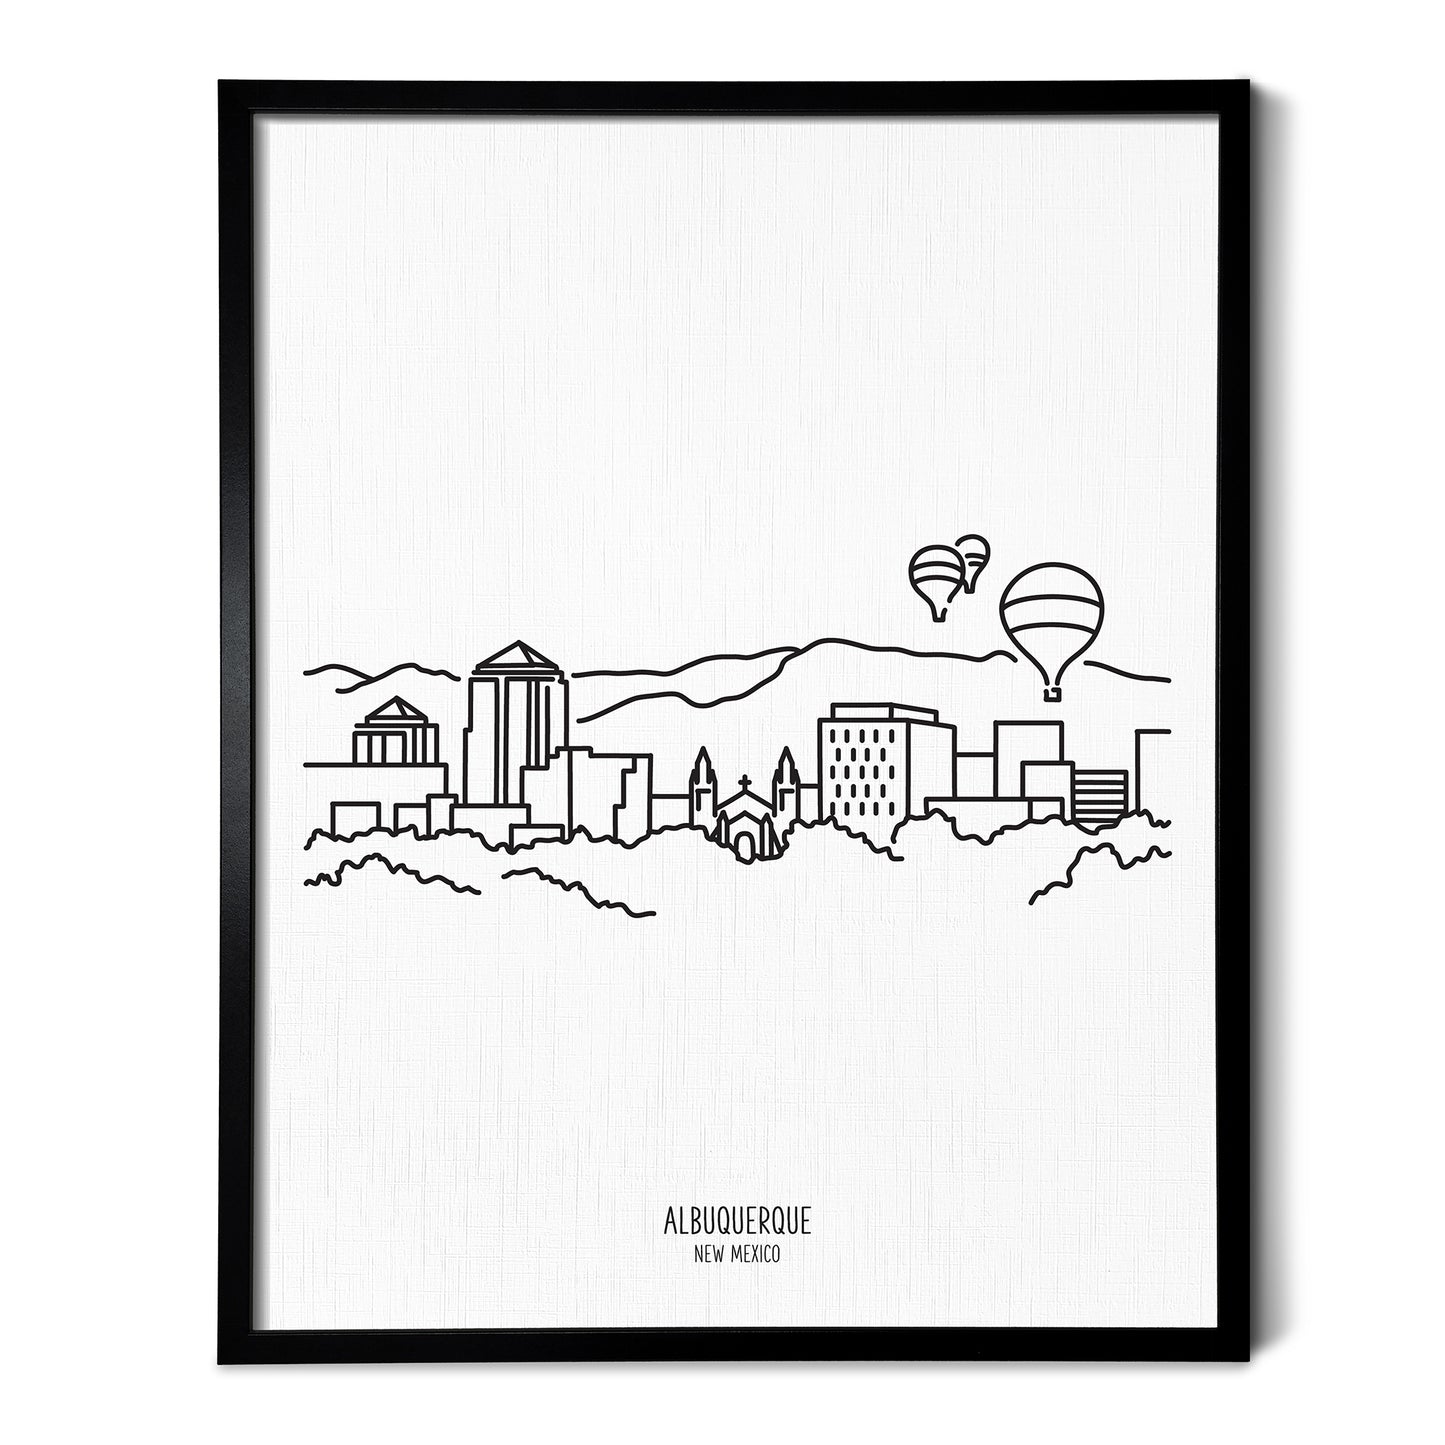 A line art drawing of the Albuquerque New Mexico Skyline on white linen paper in a thin black picture frame